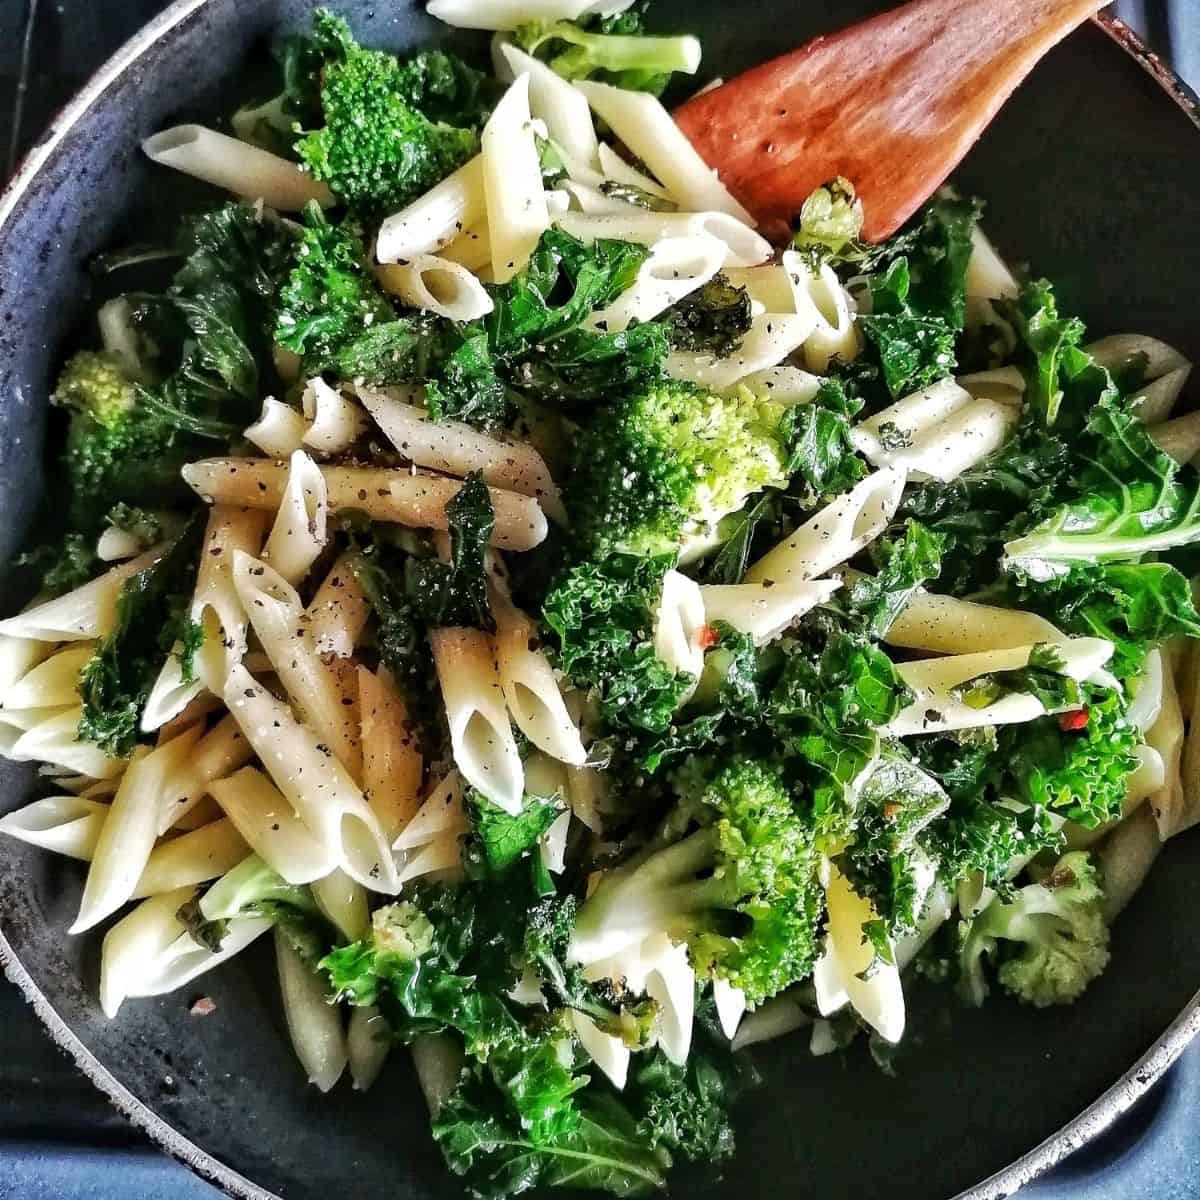 Overhead view of pasta salad with kale in a black bowl with a wooden serving spoon.